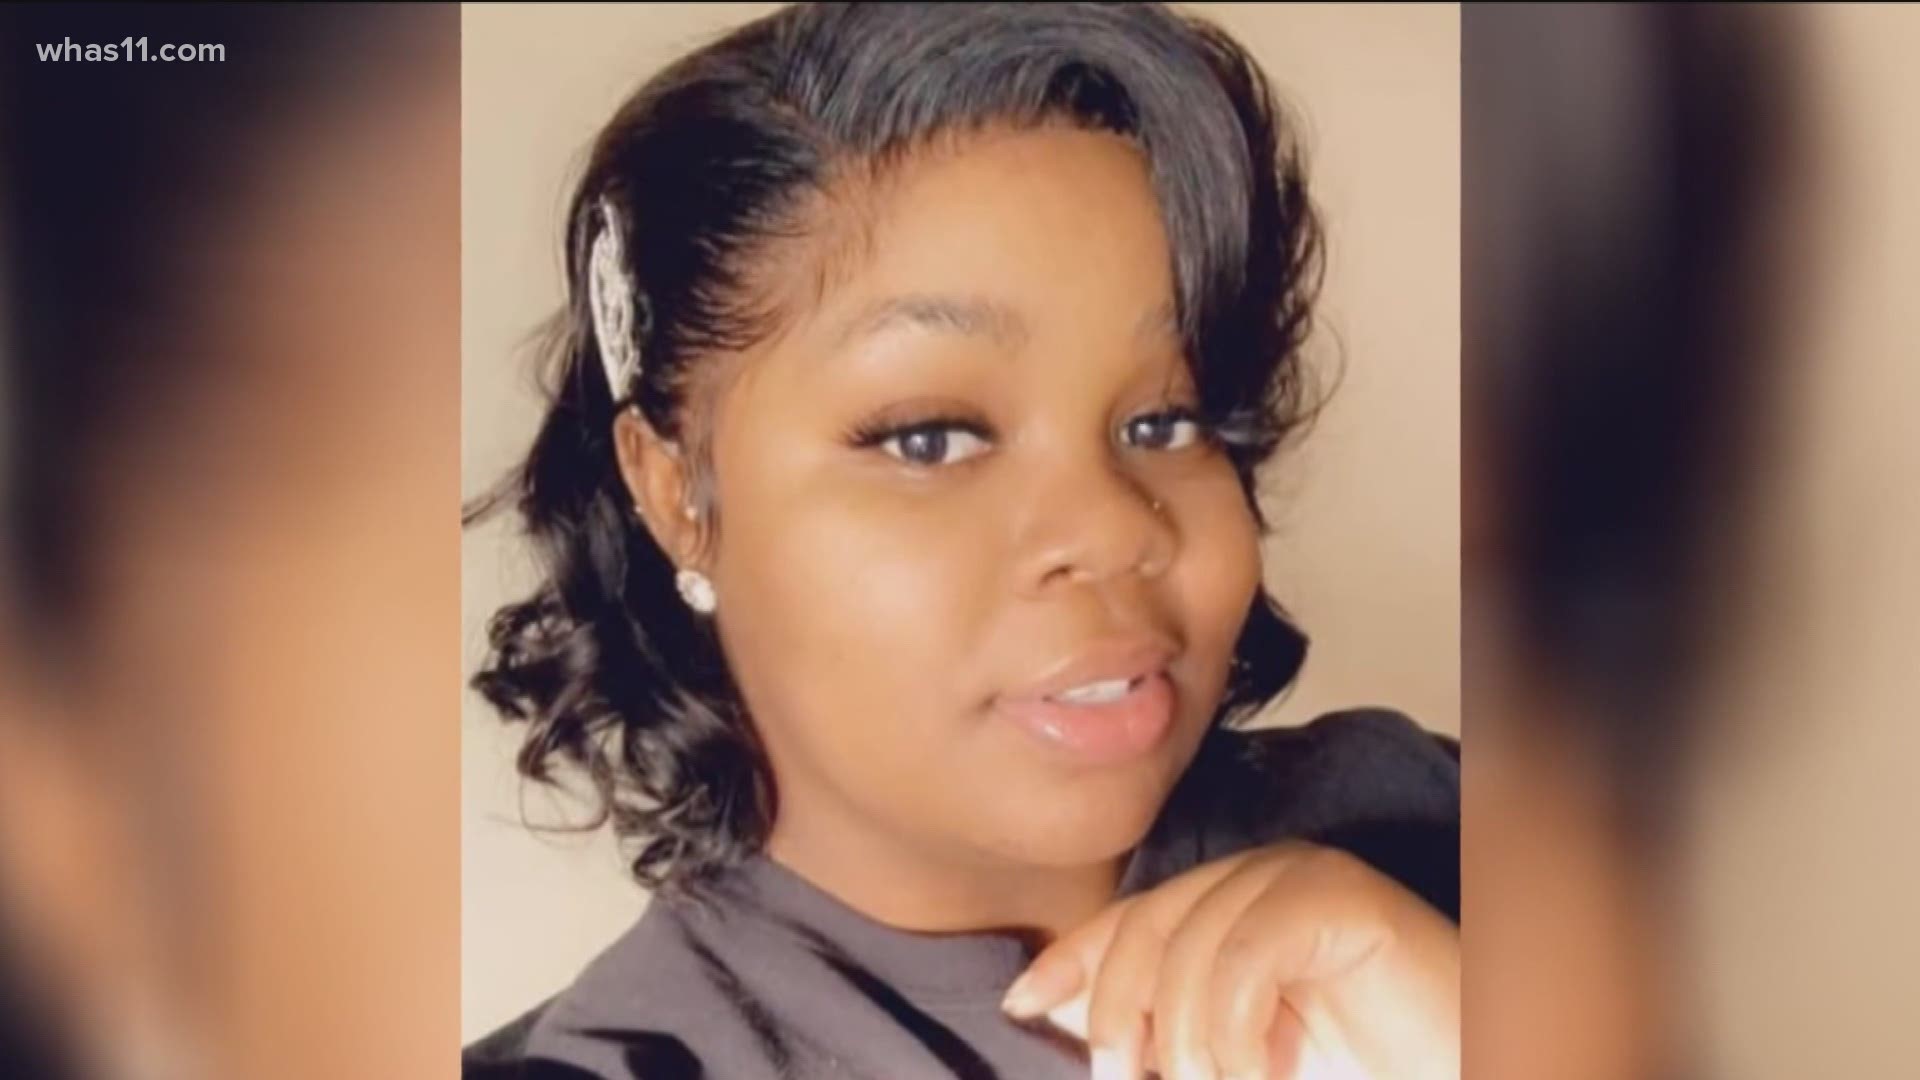 A judge has granted an anonymous grand juror's motion to speak publicly about the grand jury proceedings in the Breonna Taylor case.